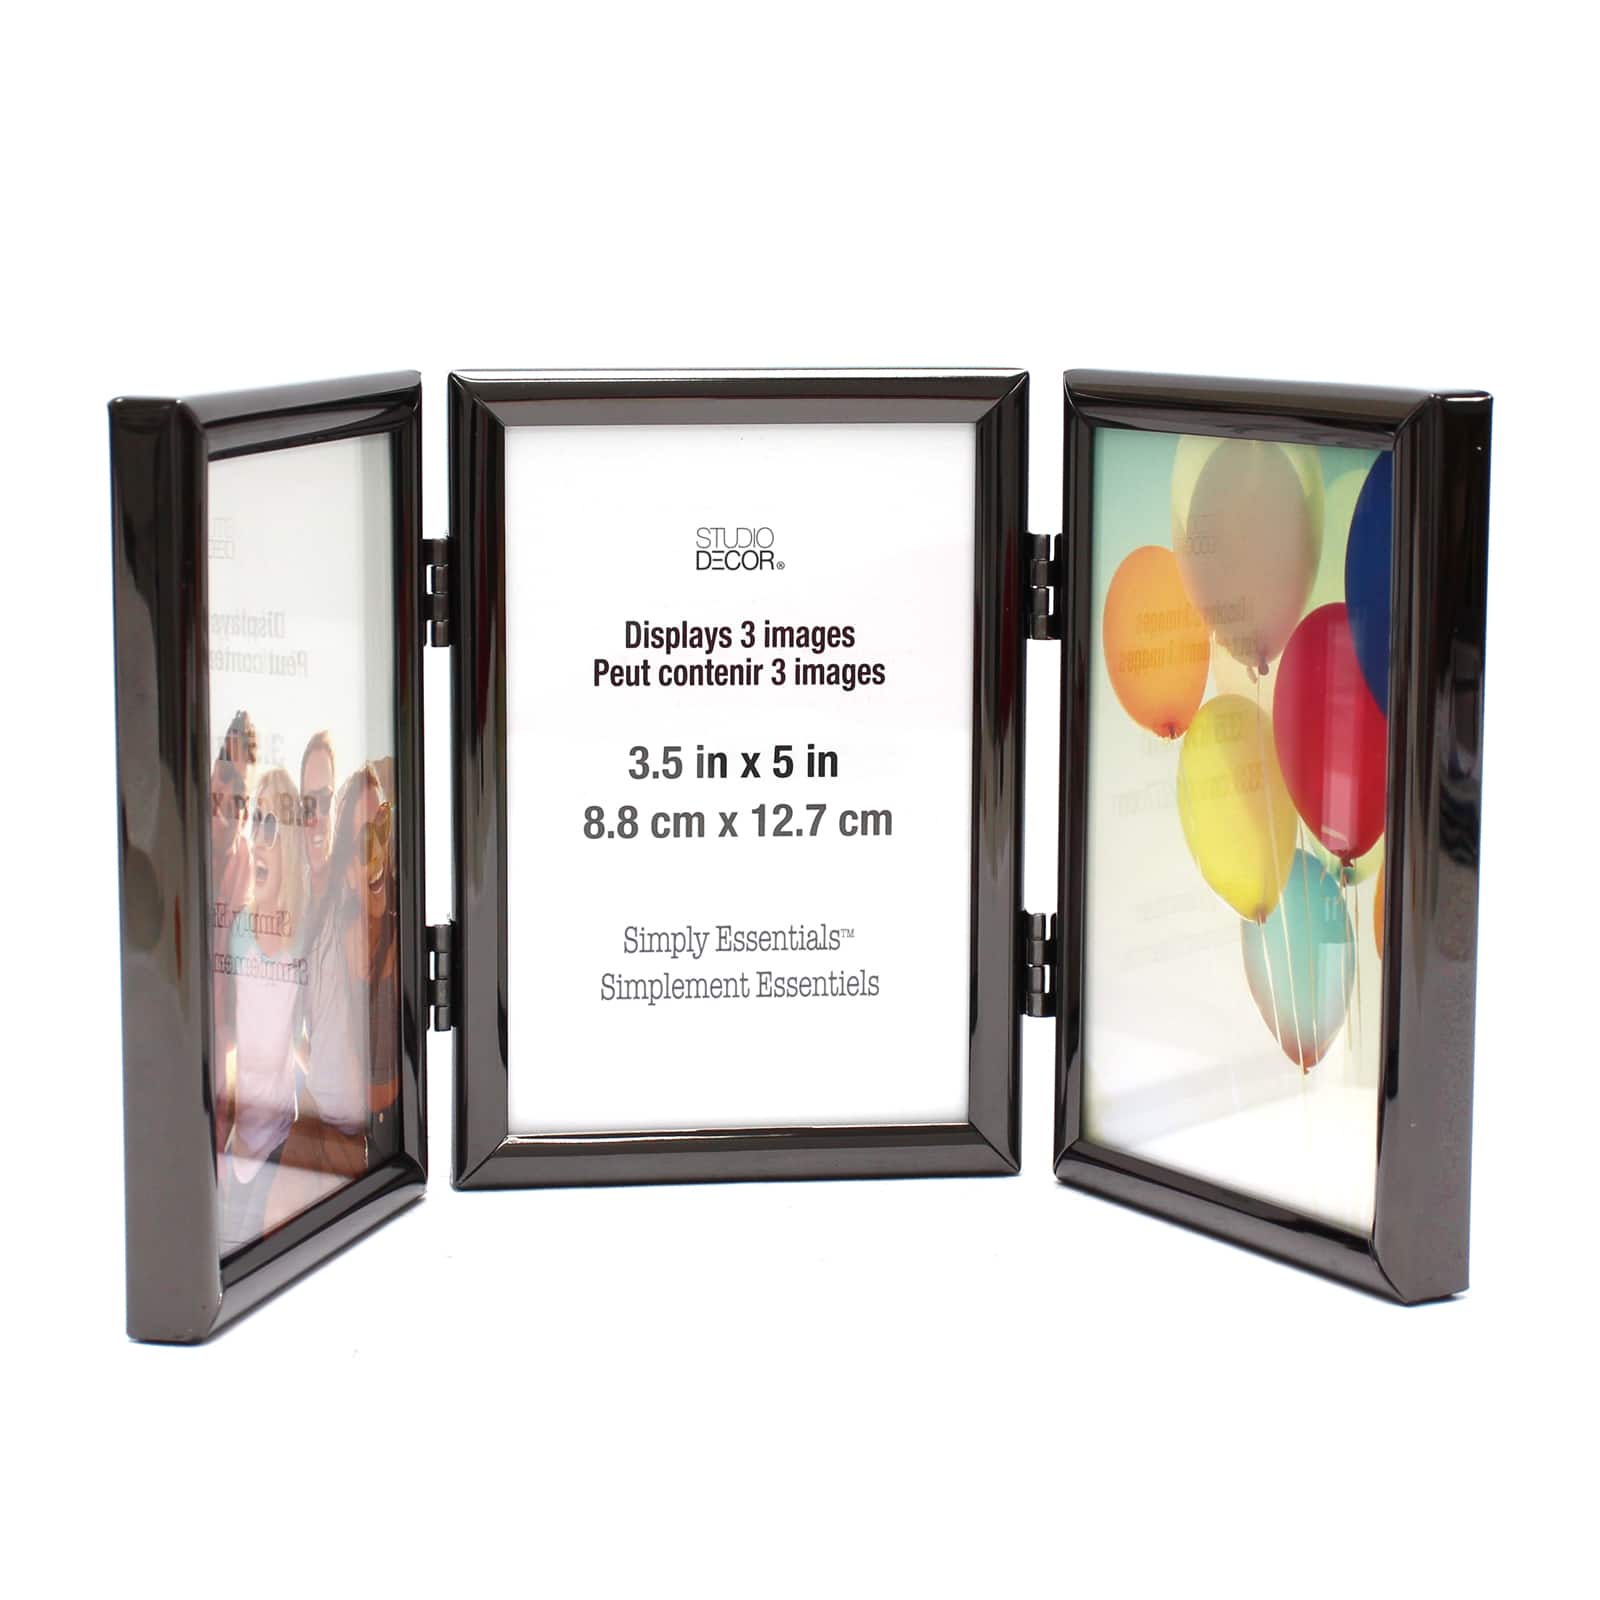 Shop For The Black Hinged Metal Frame 3 5 X 5 Simply Essentials By Studio Decor At Michaels